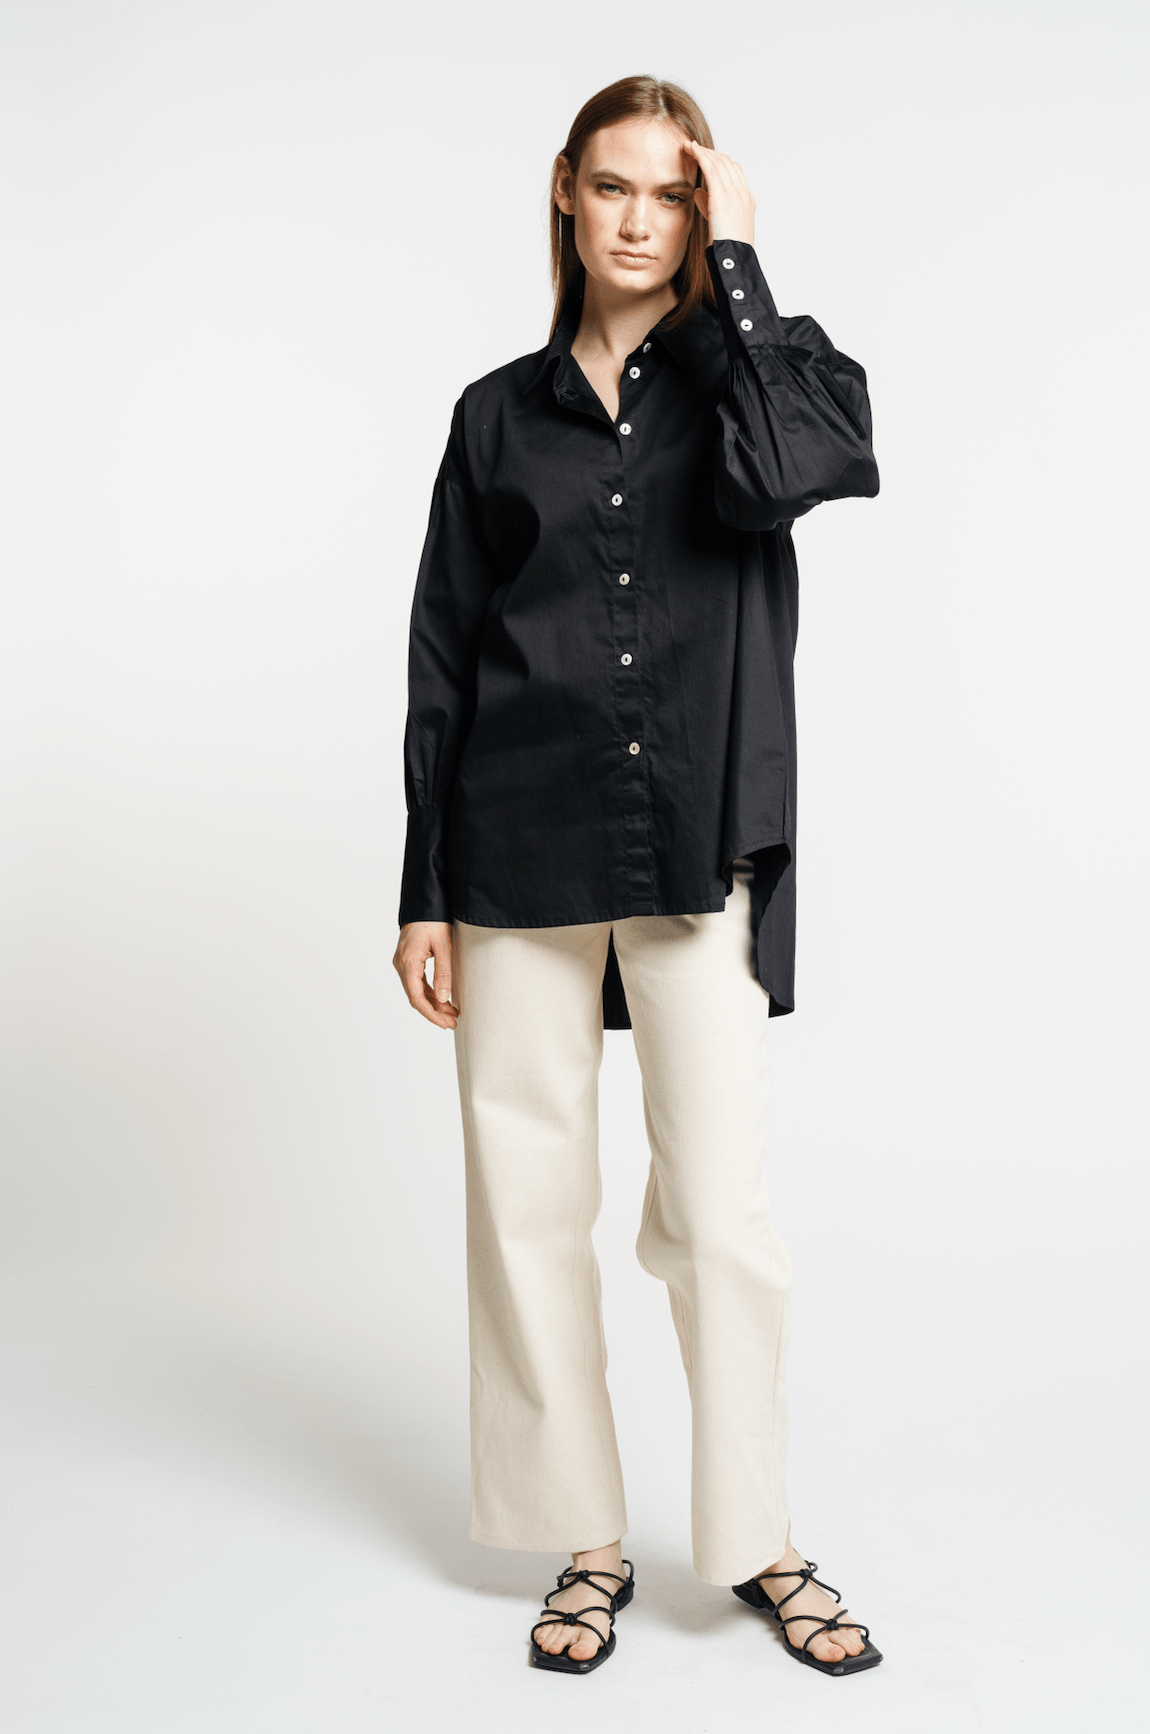 The model is wearing a Museo Button Up - Black shirt and beige pants.